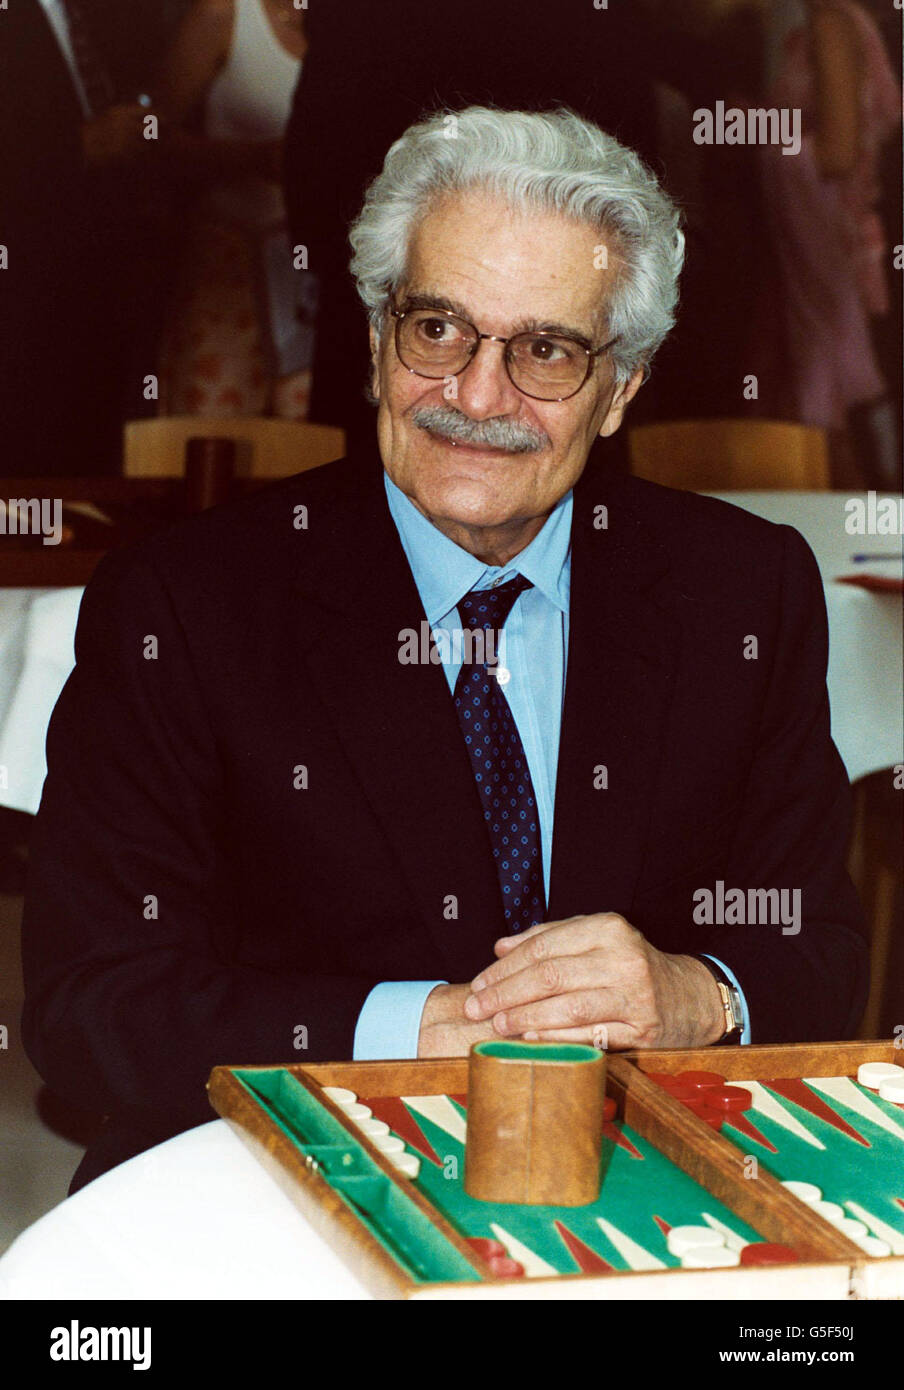 Actor Omar Sharif taking part in a backgammon tournament in aid of a children's charity. Omar Sharif hosted the event in St James Street, central London, to raise cash for the One to One Children's Fund. 7/8/03:Hollywood legend Omar Sharif has been given a one month suspended prison sentence, for head butting a policeman in a French casino. The 71-year-old Egyptian star of Doctor Zhivago and Lawrence of Arabia was also fined 1,000 for insults and violence directed at a policeman at the Enghien-les-Bains casino near Paris. Sharif was arguing with a croupier while playing roulette at the Stock Photo